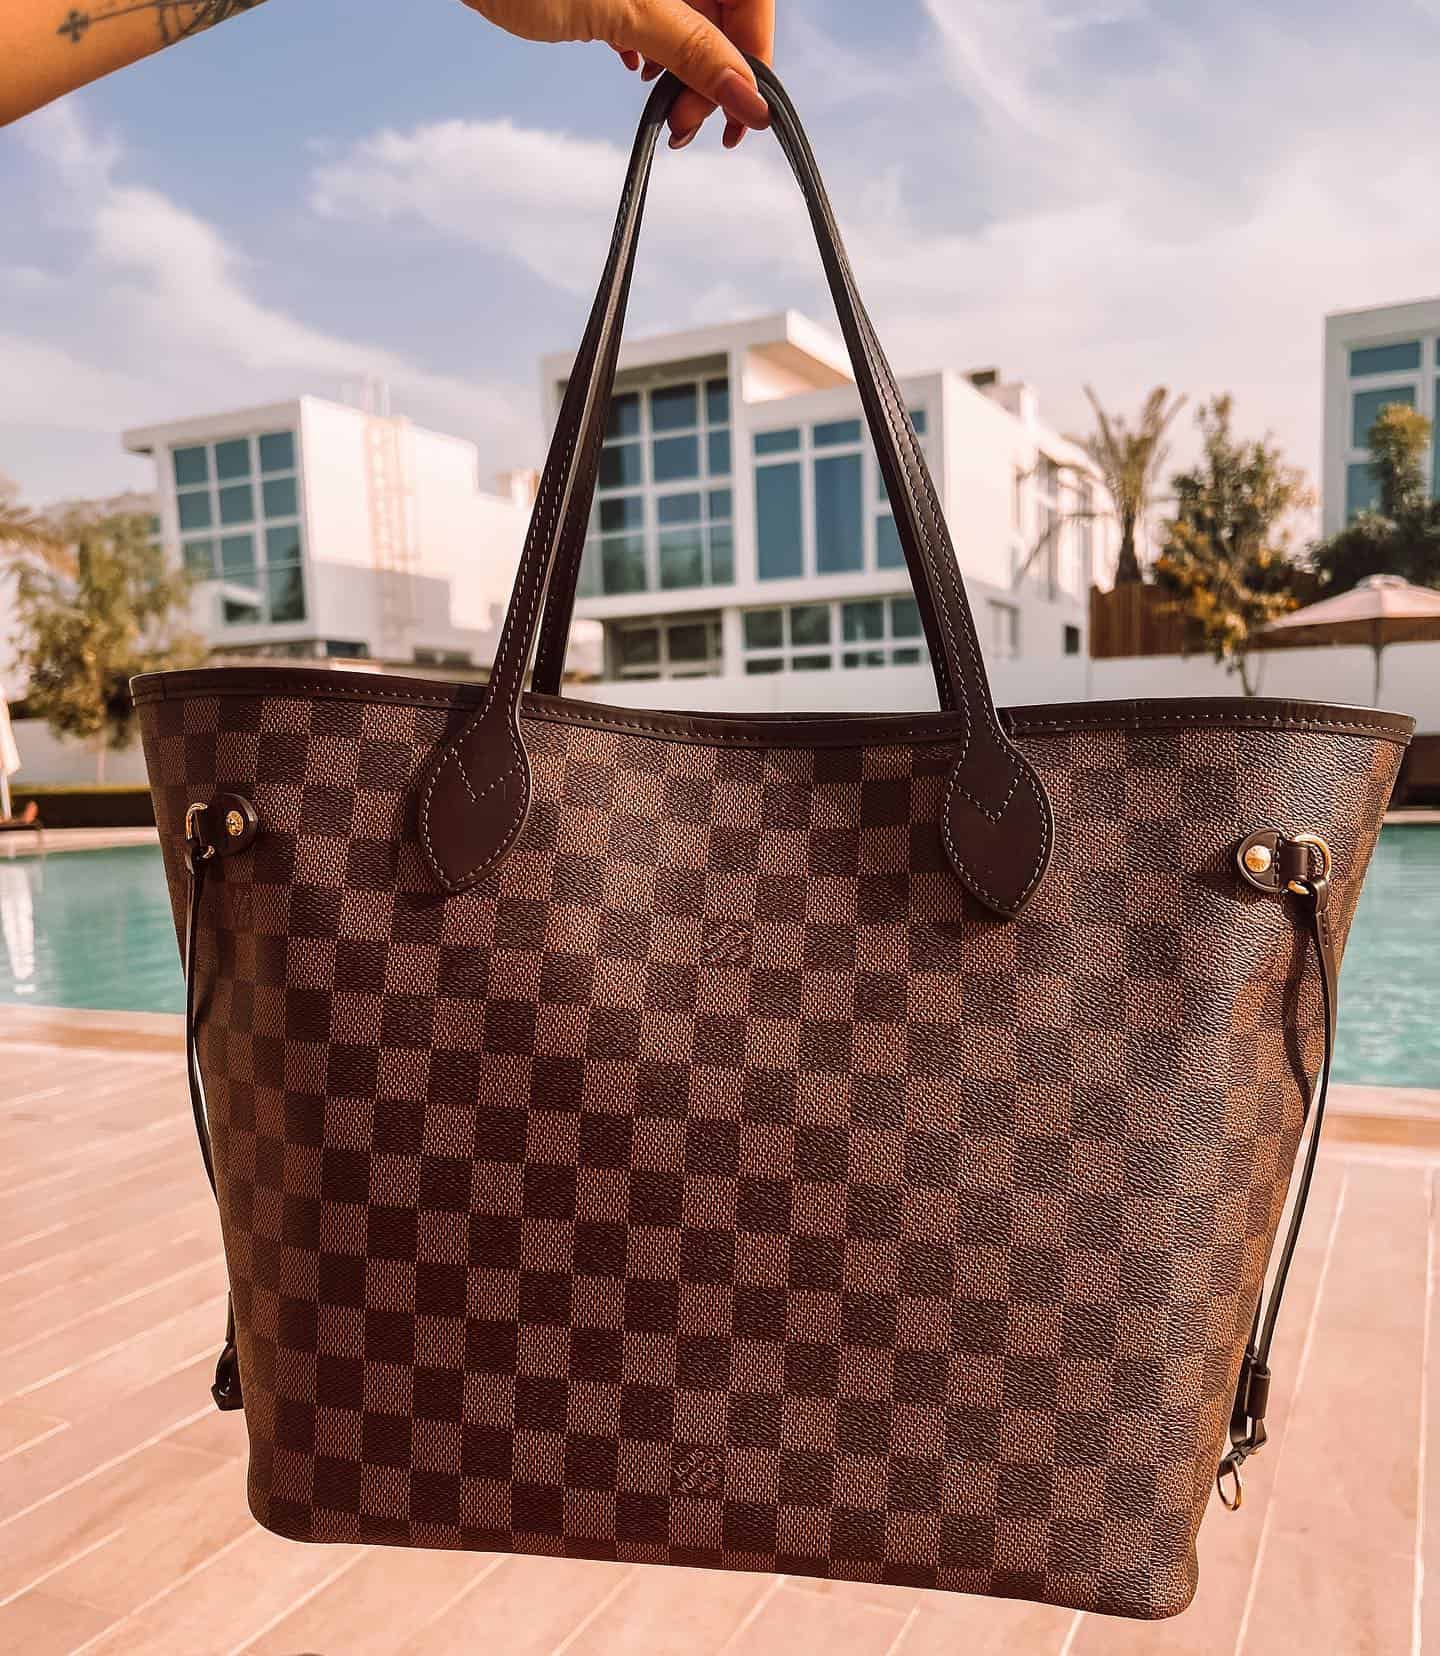 What is the best LV Bag to buy